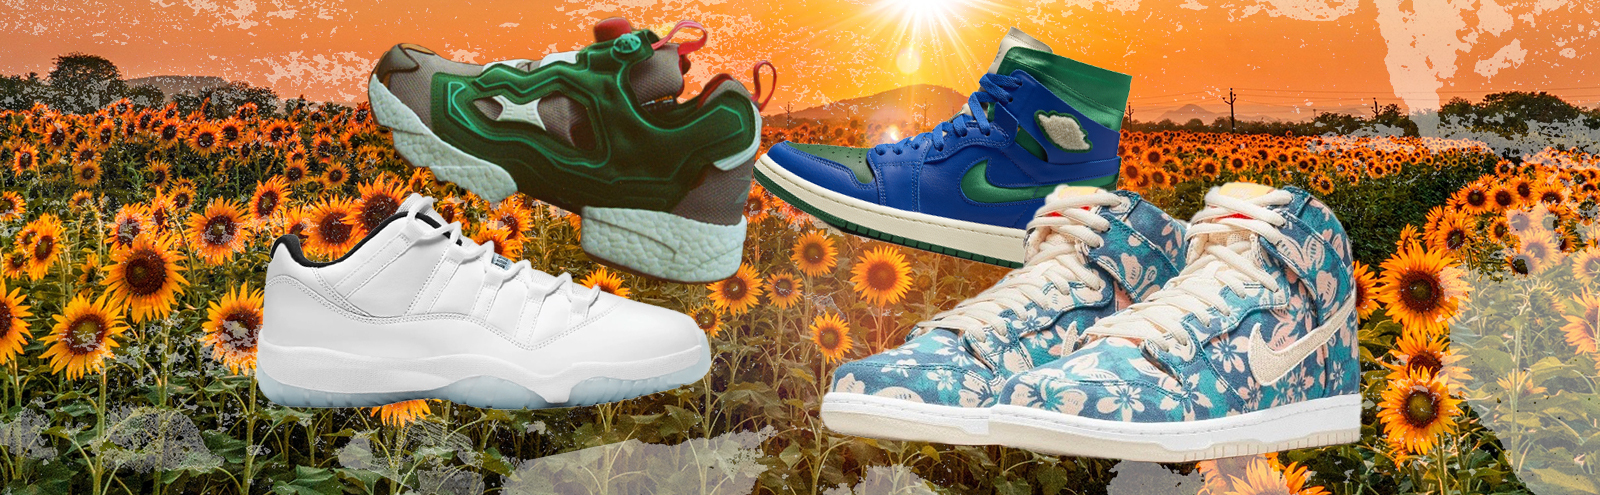 Snx Dlx Featuring Aleali May S Jordan 1 Califia Low Top Legend Blue Jordan 11s New Dunks And More - roblox flora frenzy how to get a valentine's day seed